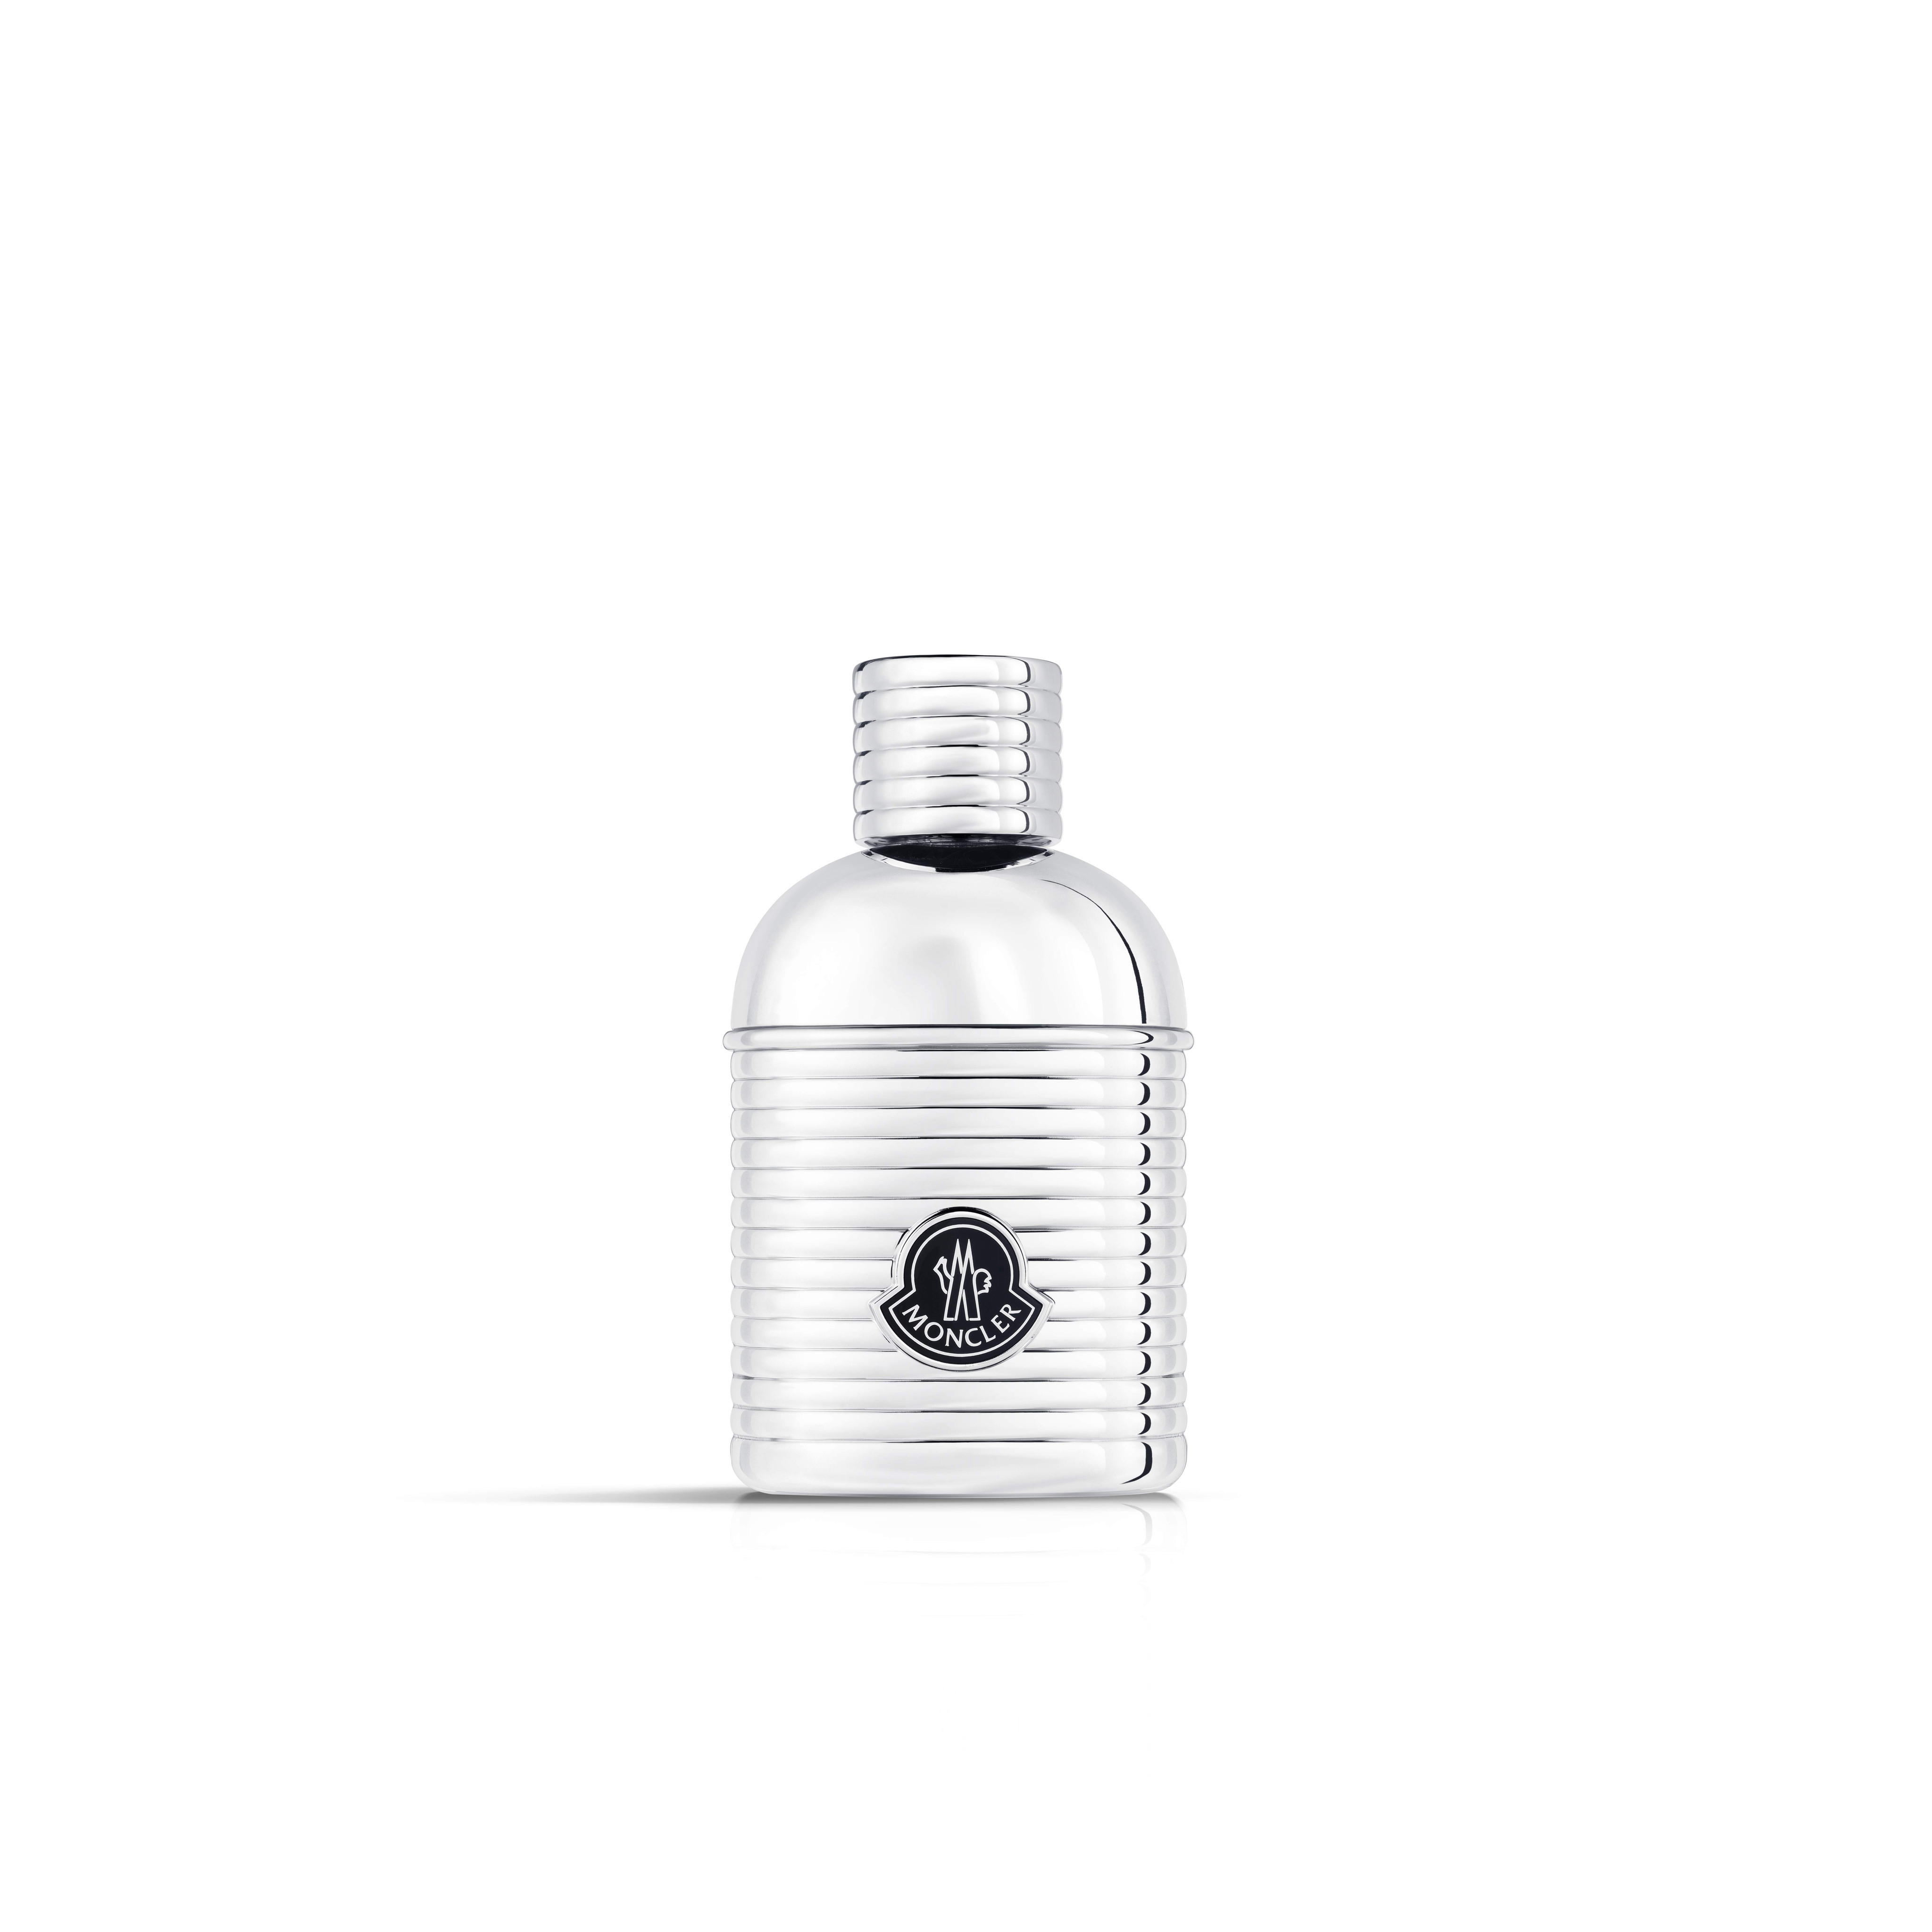 Moncler Pour Homme EDP 60ml, Bianco, large image number 2